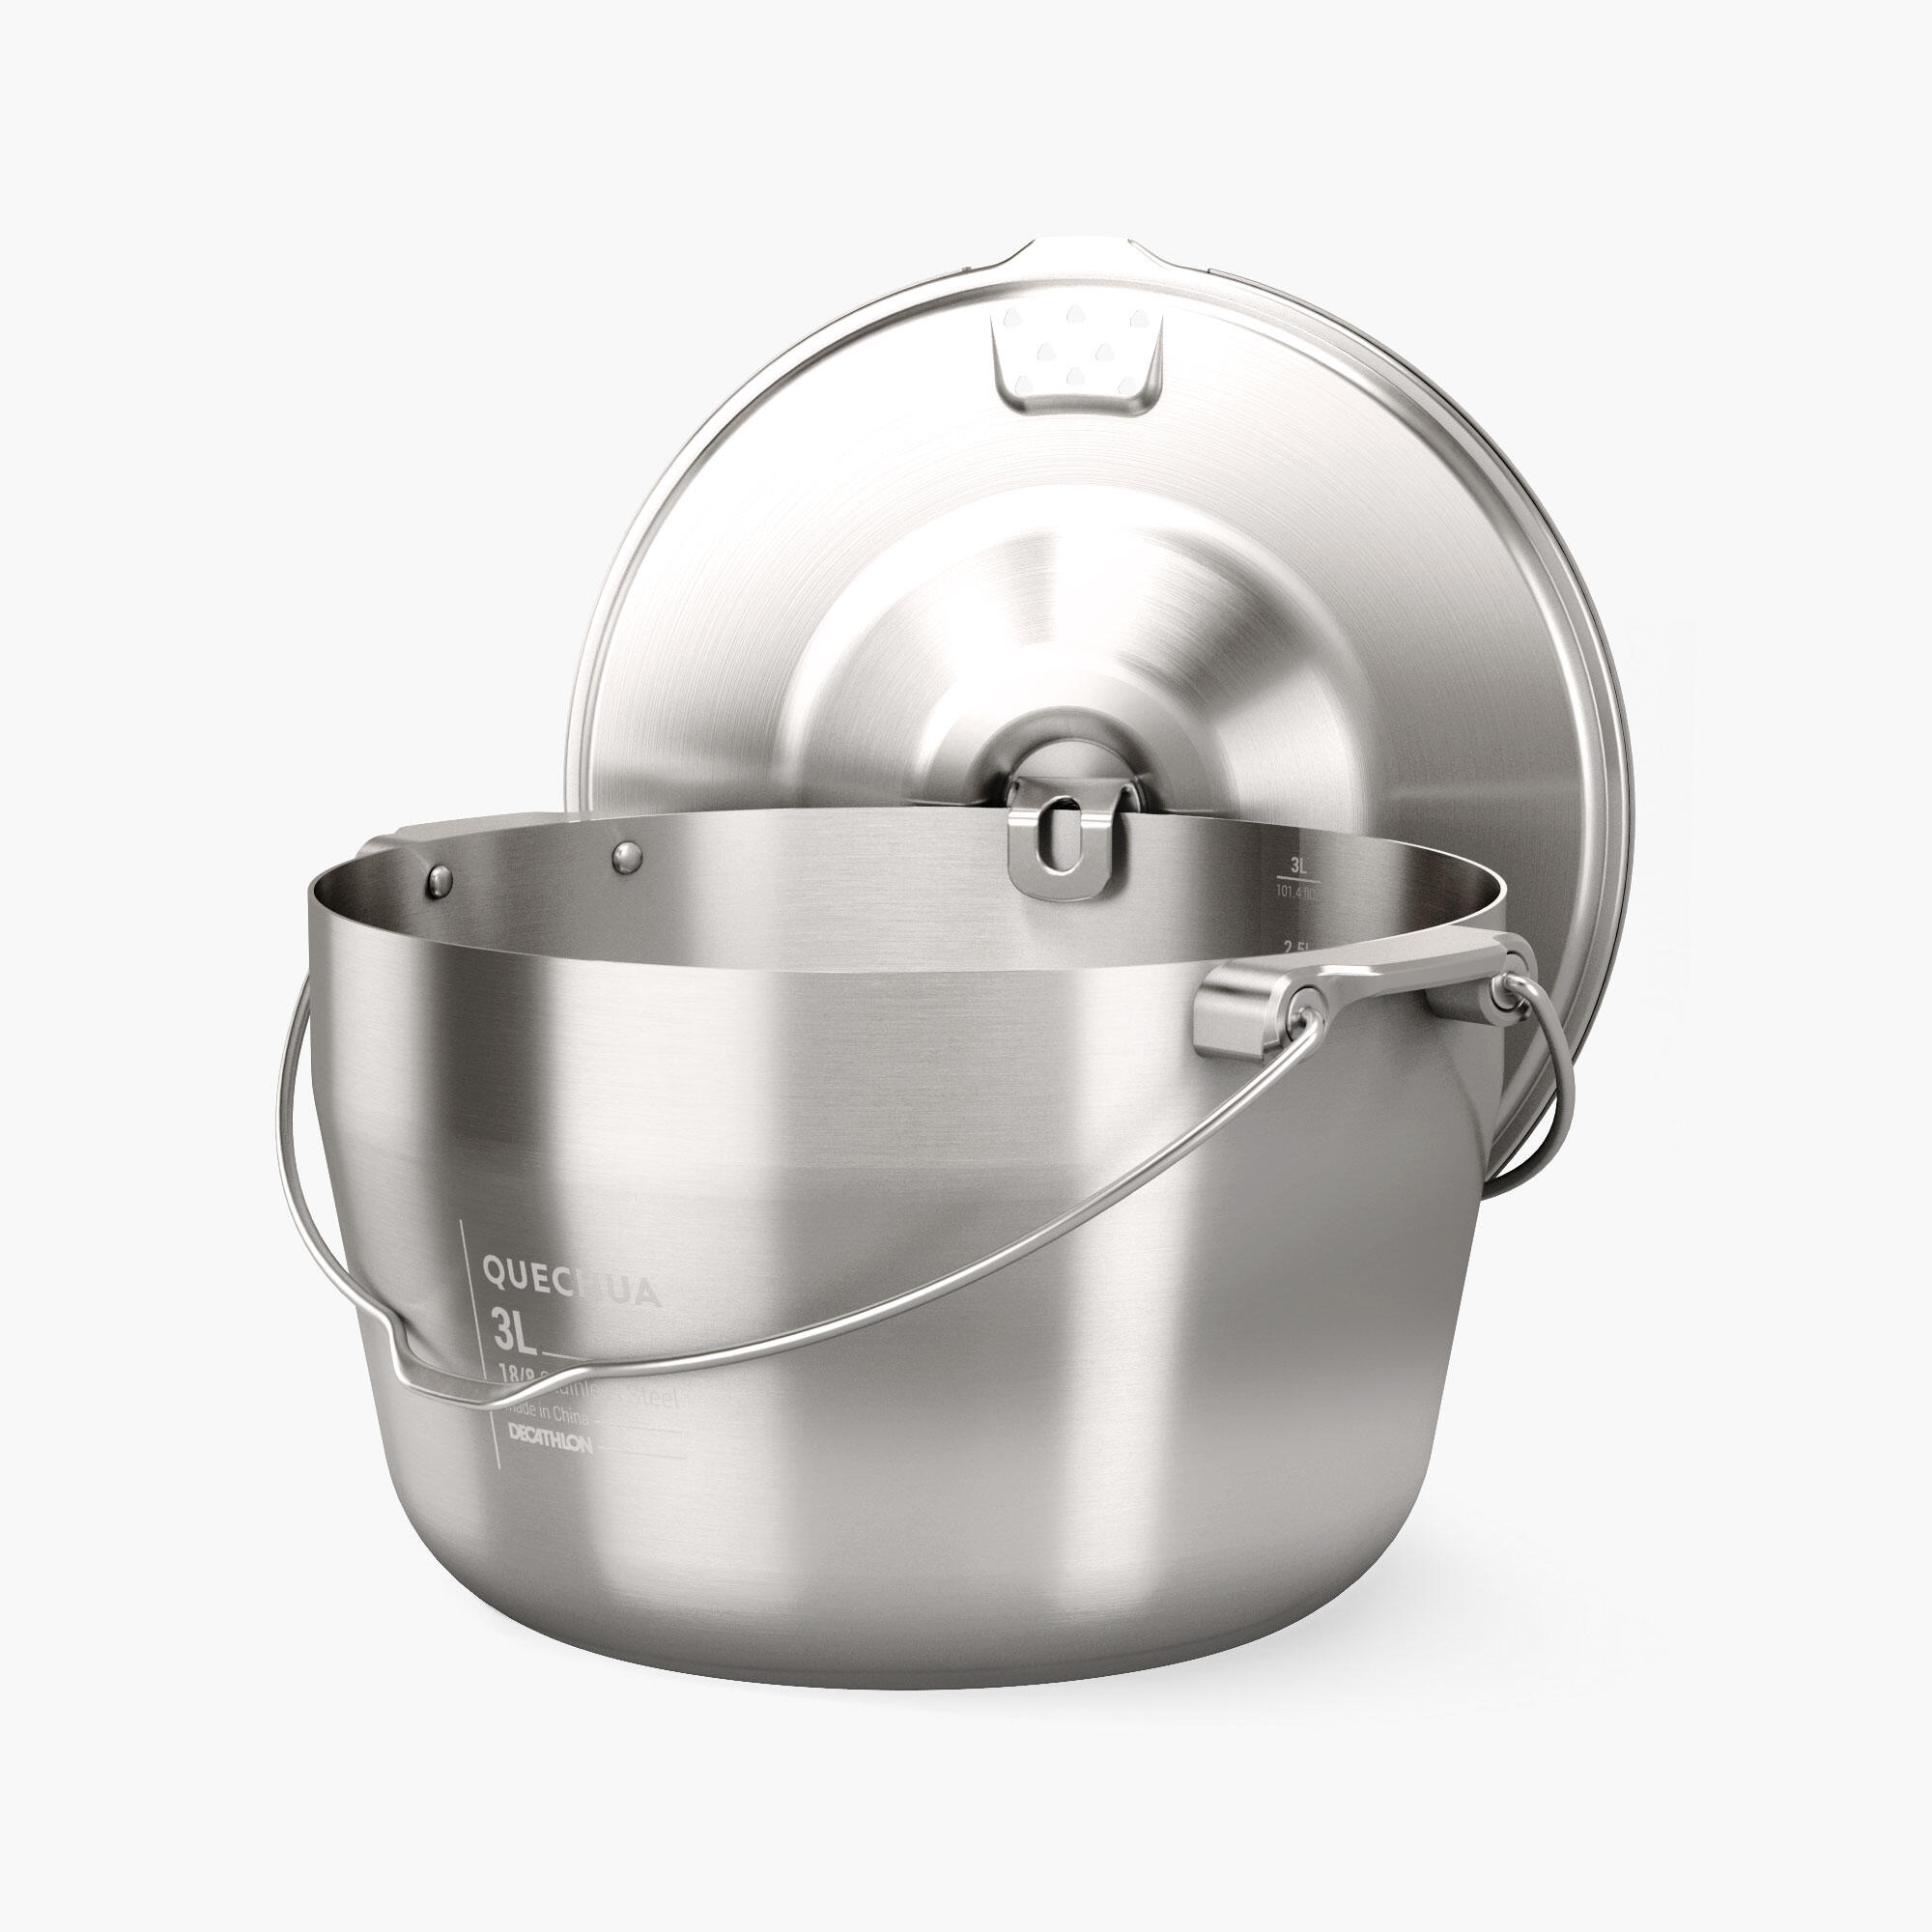 4-person camp fire cooking pot - stainless steel -3 litres 2/8